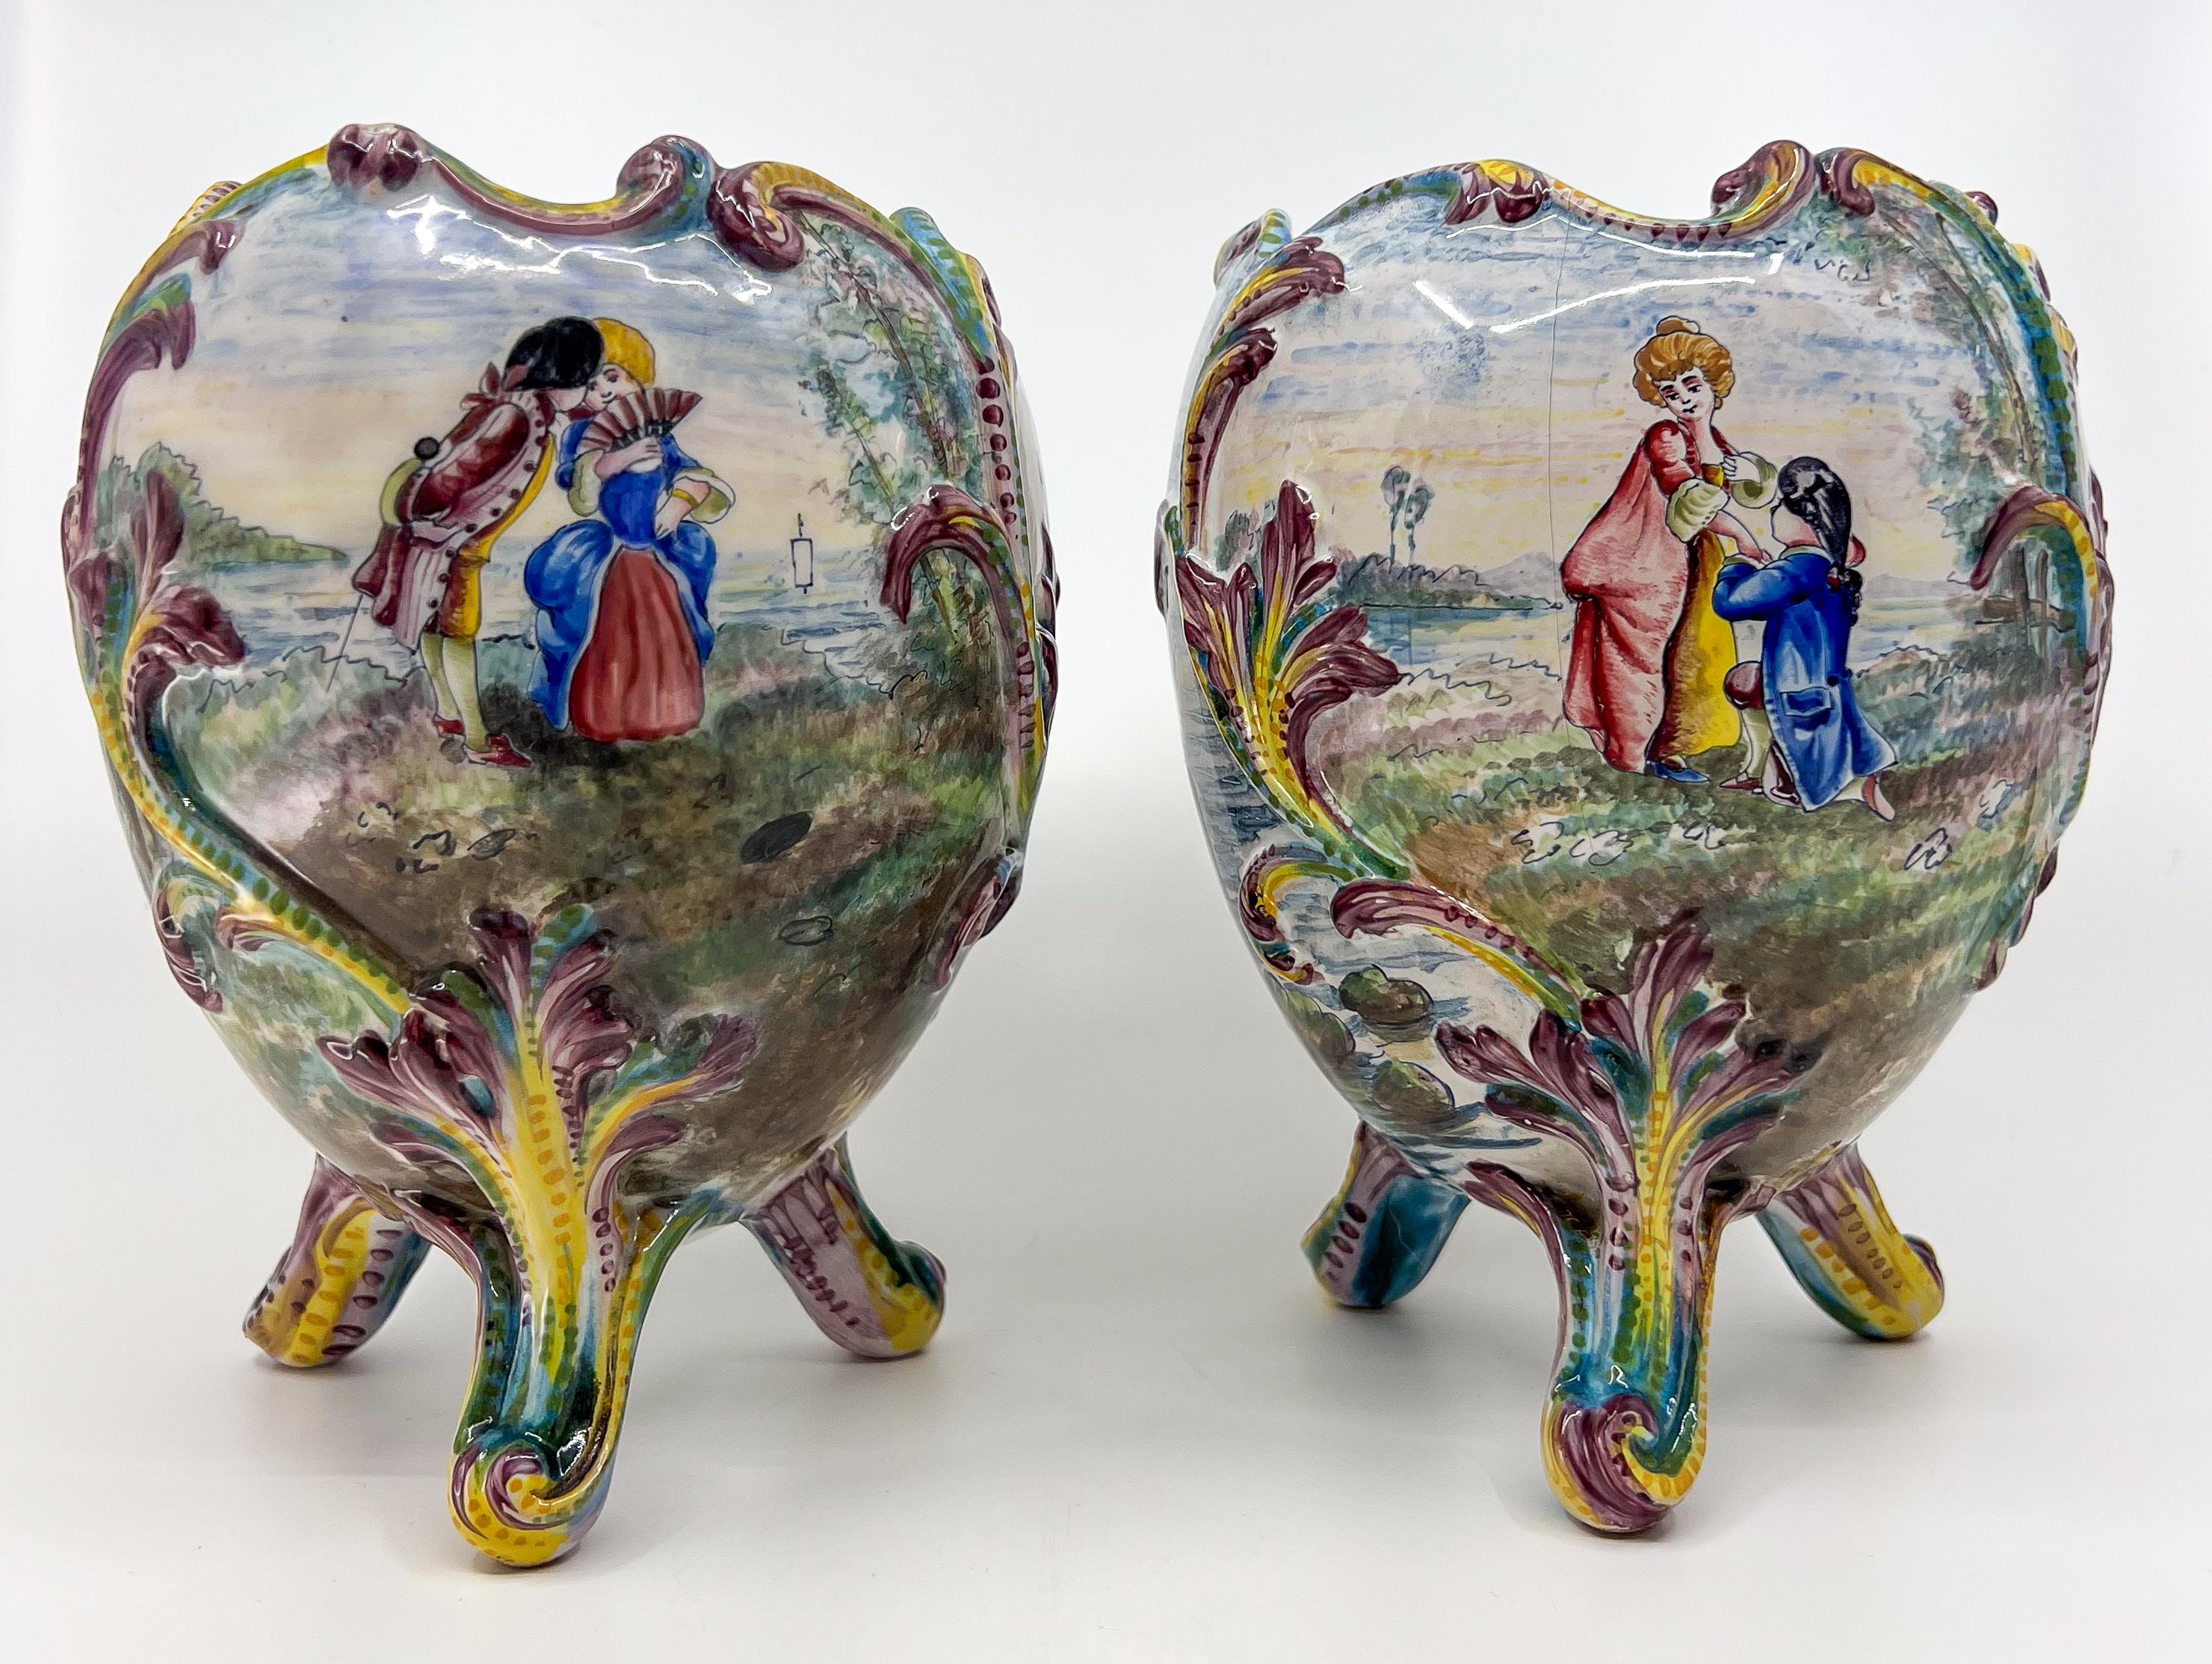 Pair of Belle Epoque hand painted porcelain vases or jardinieres with romantic scenes, boats and flowers.

